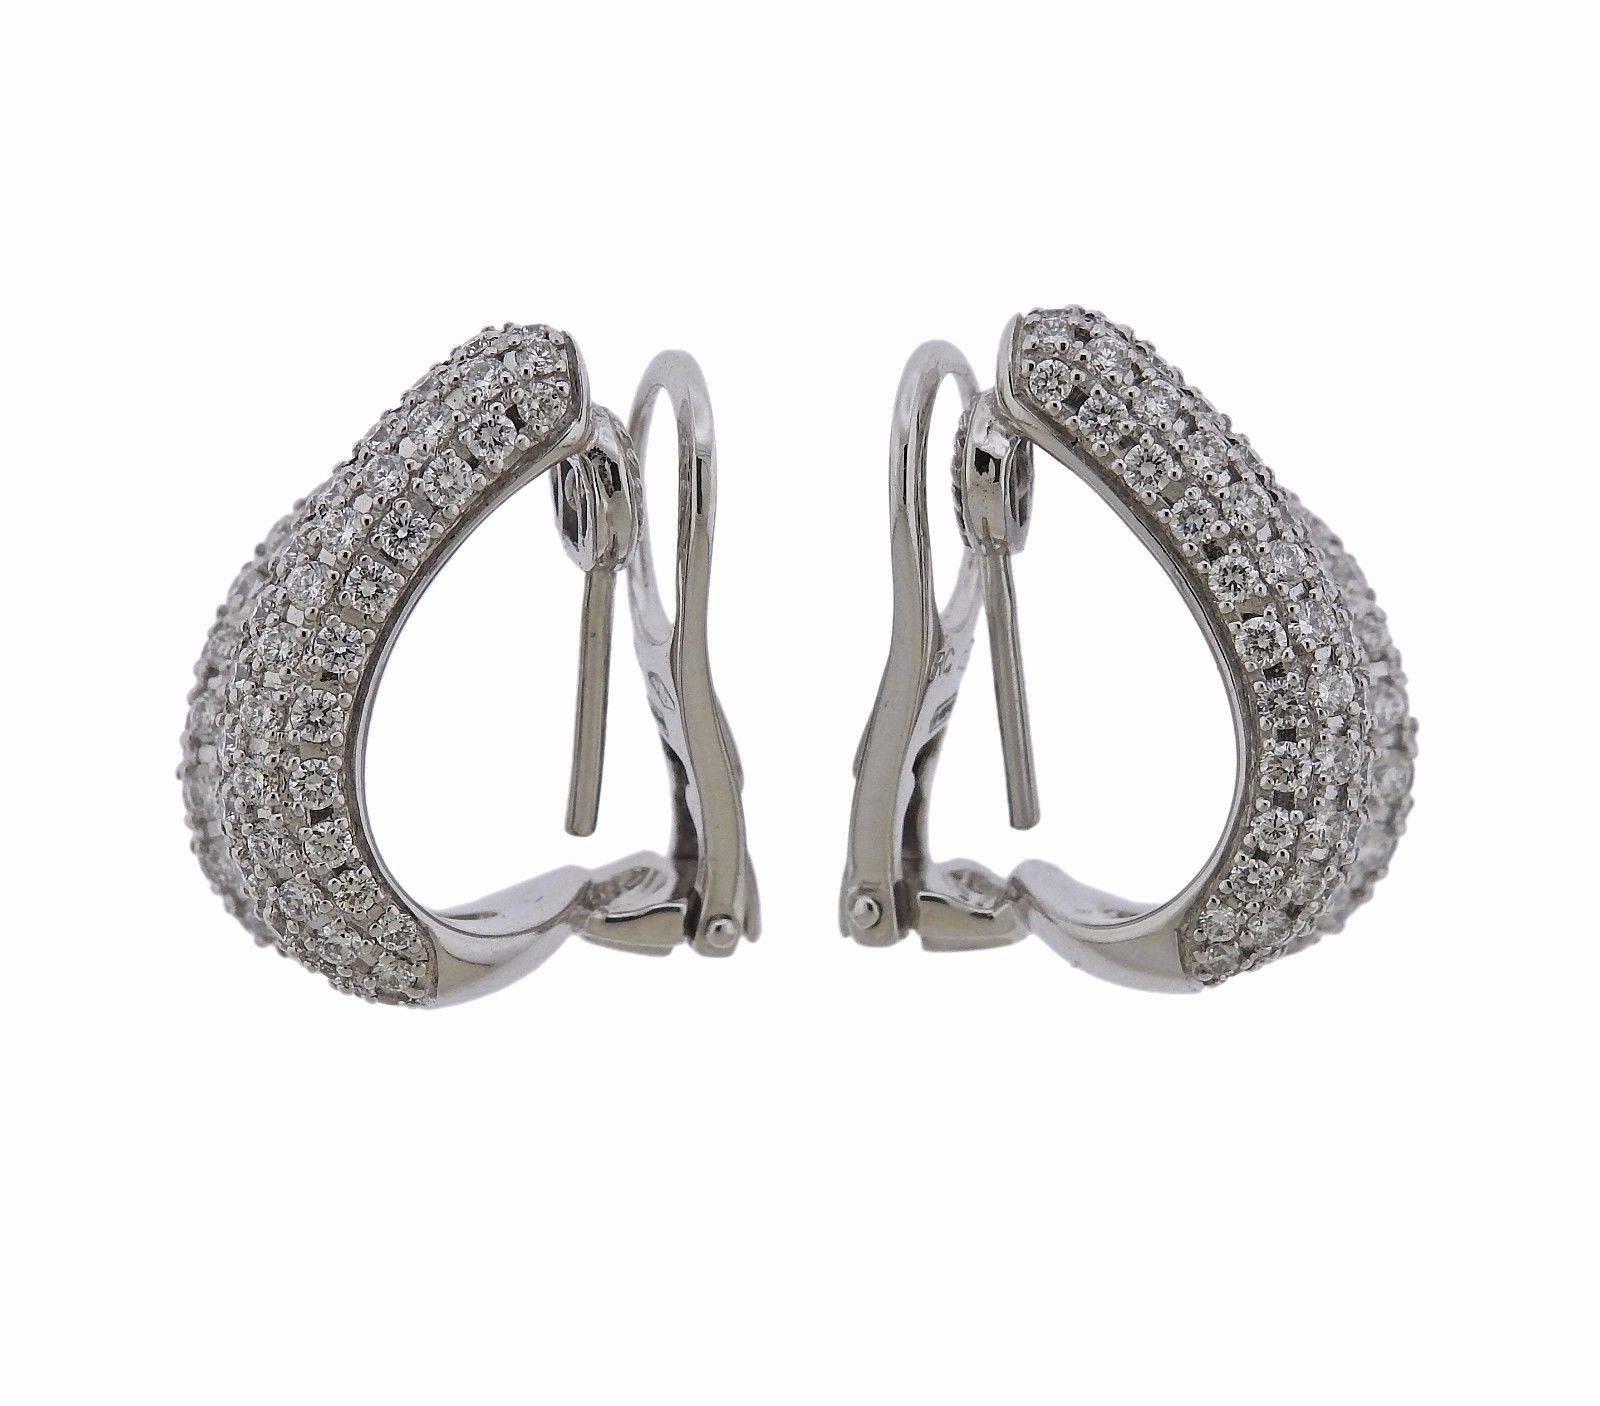 A pair of 18k white gold earrings set with approximately 1.80ctw of G/VS diamonds.  The earrings measure 20mm x 10mm and weigh 12.9 grams. Marked: Signature ruby, RC, 750, 1226VI 12.9 grams.